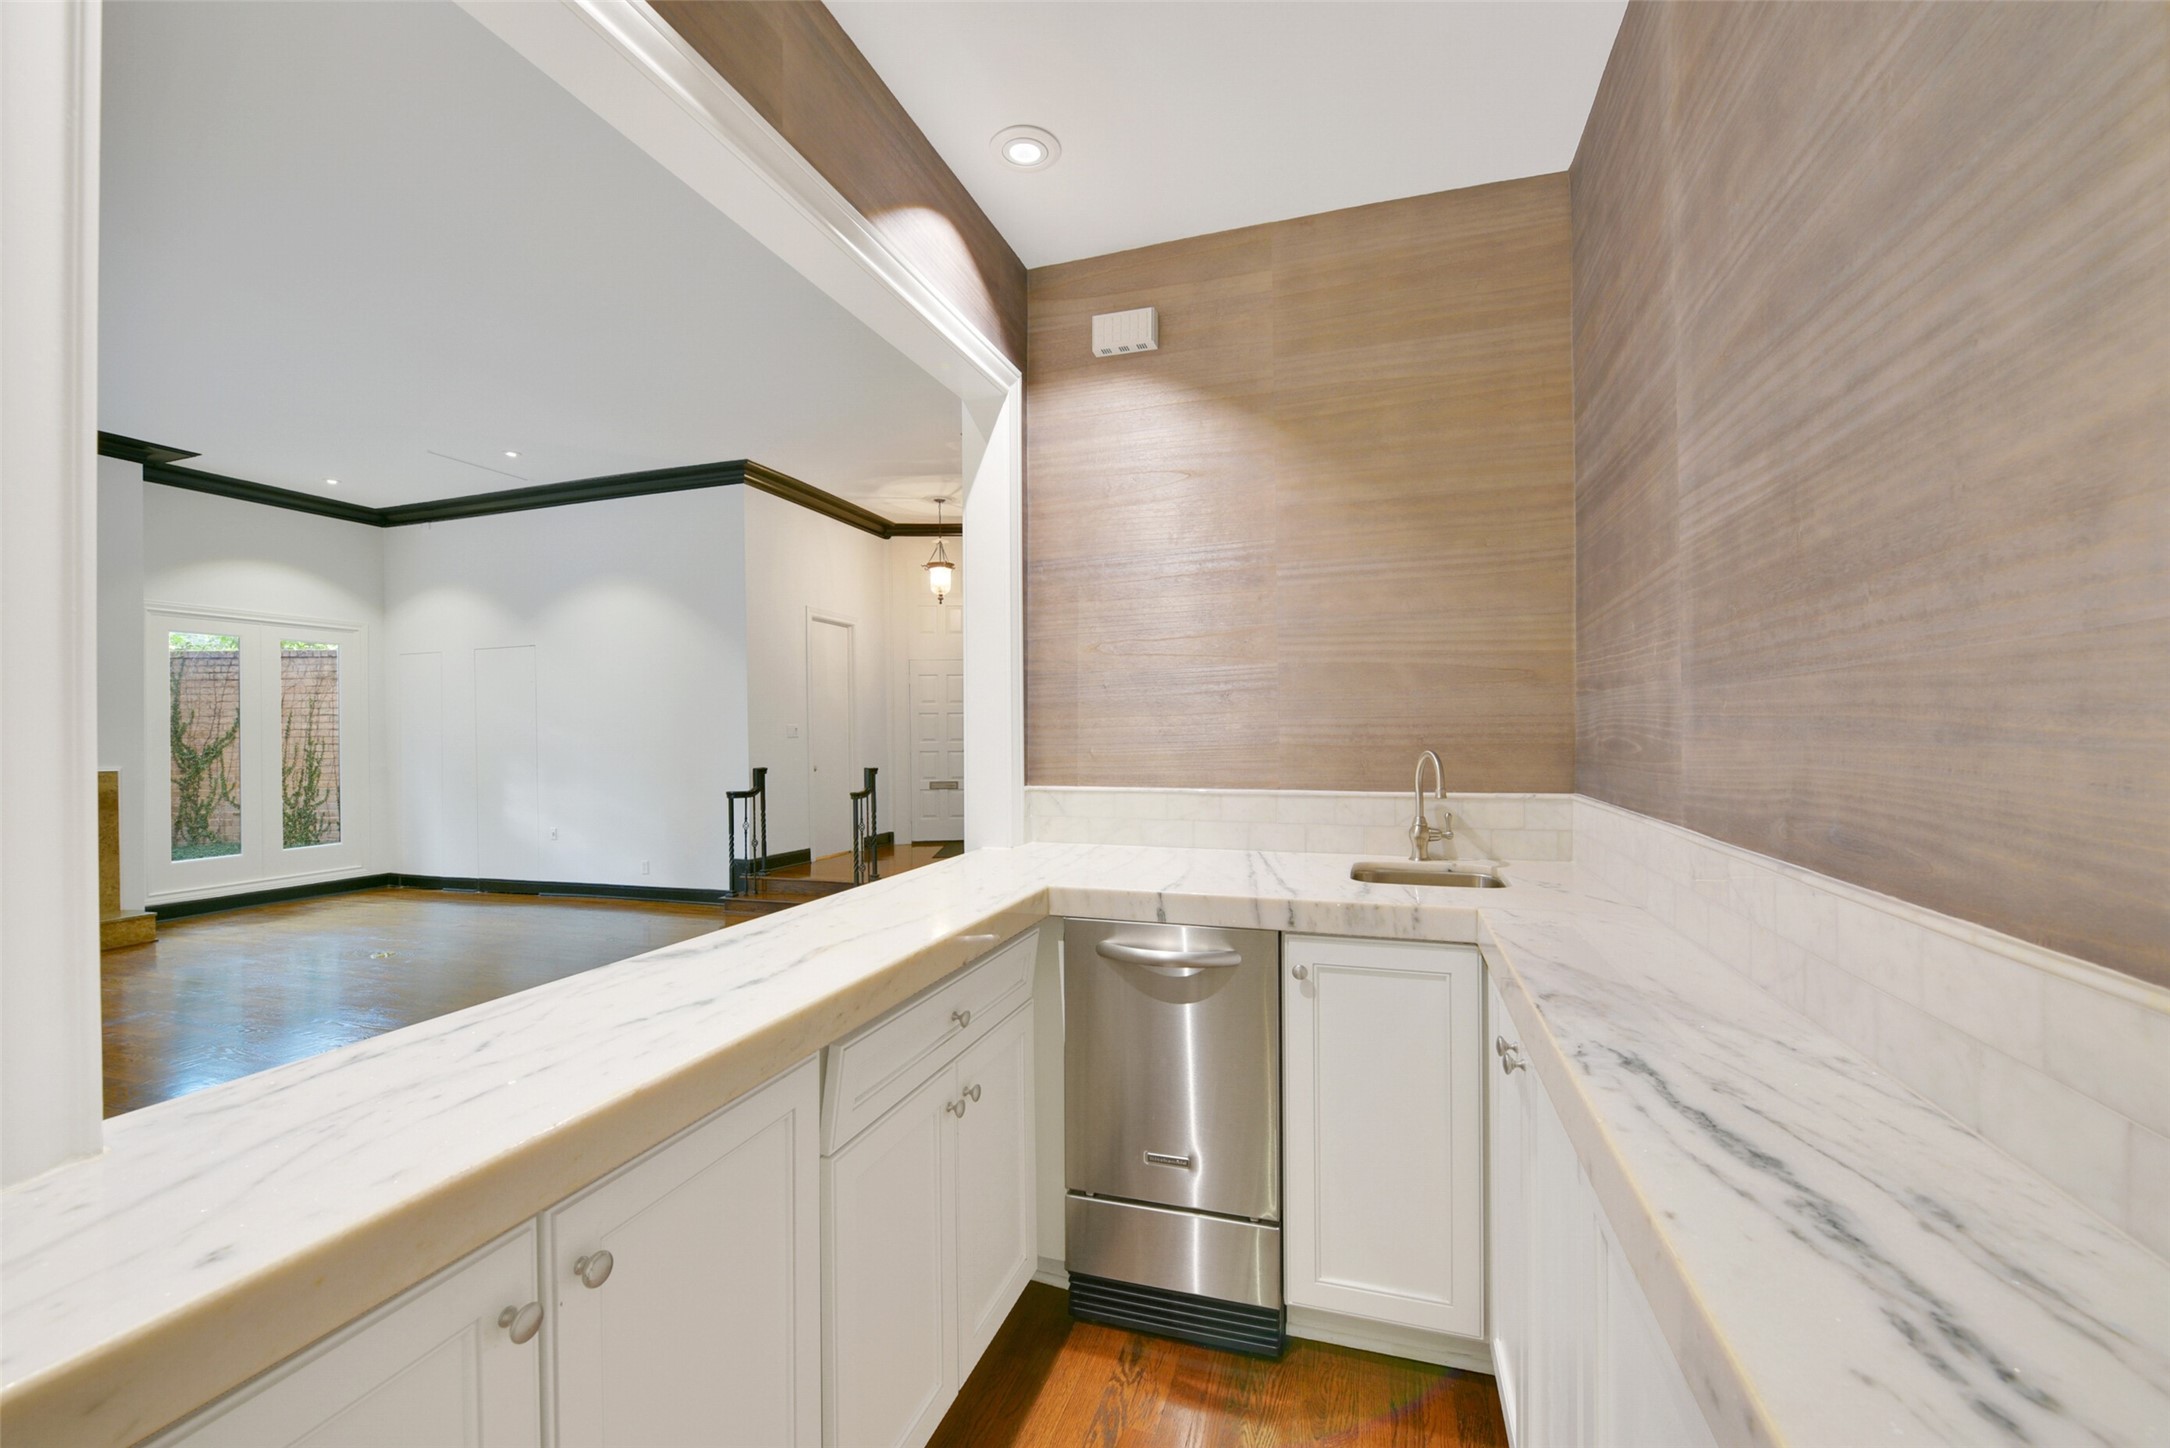 Carrara marble and subway tiles accent the large wet bar with ice maker.